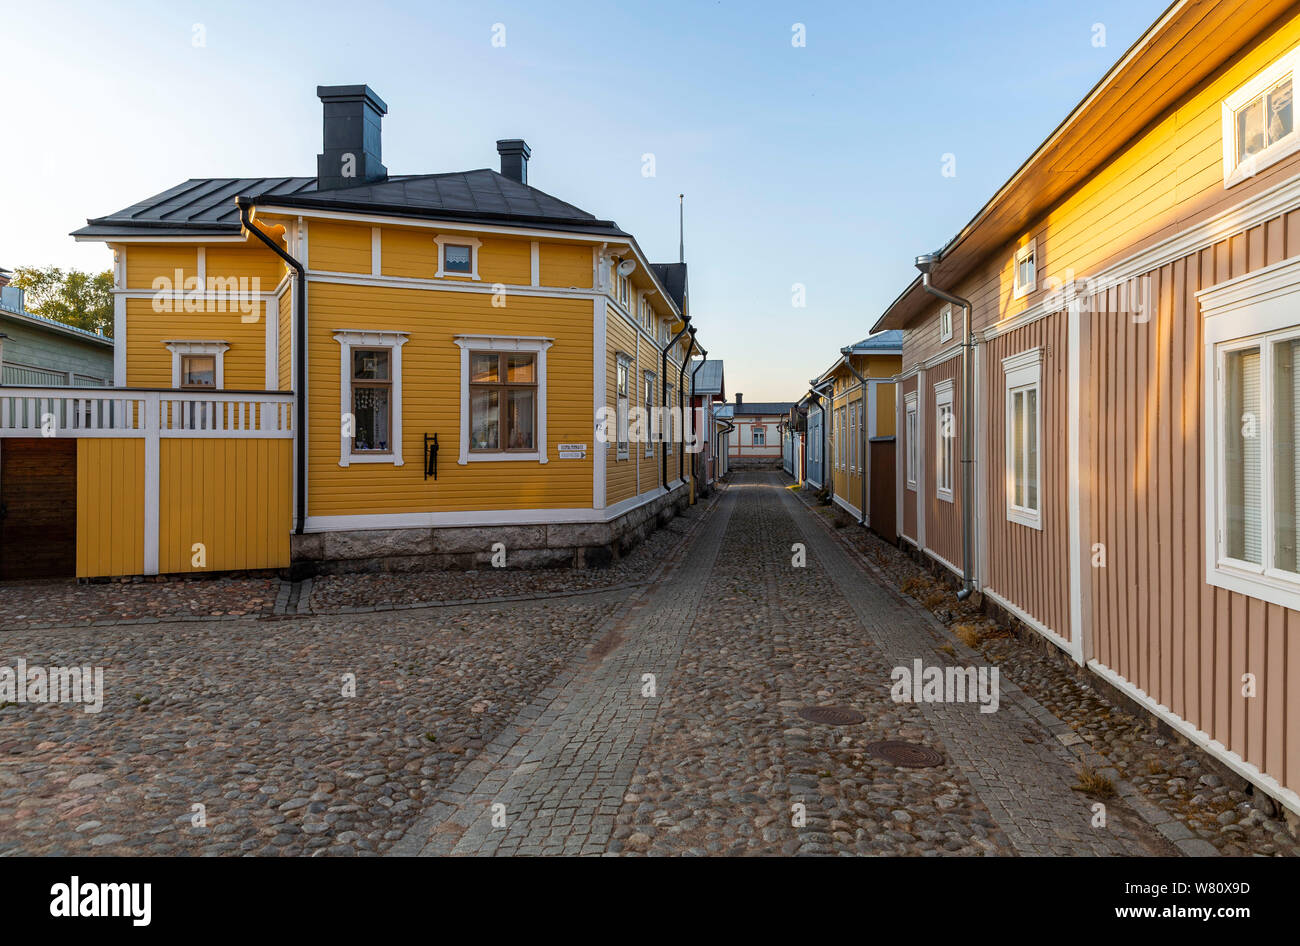 Well-preserved houses in the wooden city centre of the town of Rauma, Finland Stock Photo